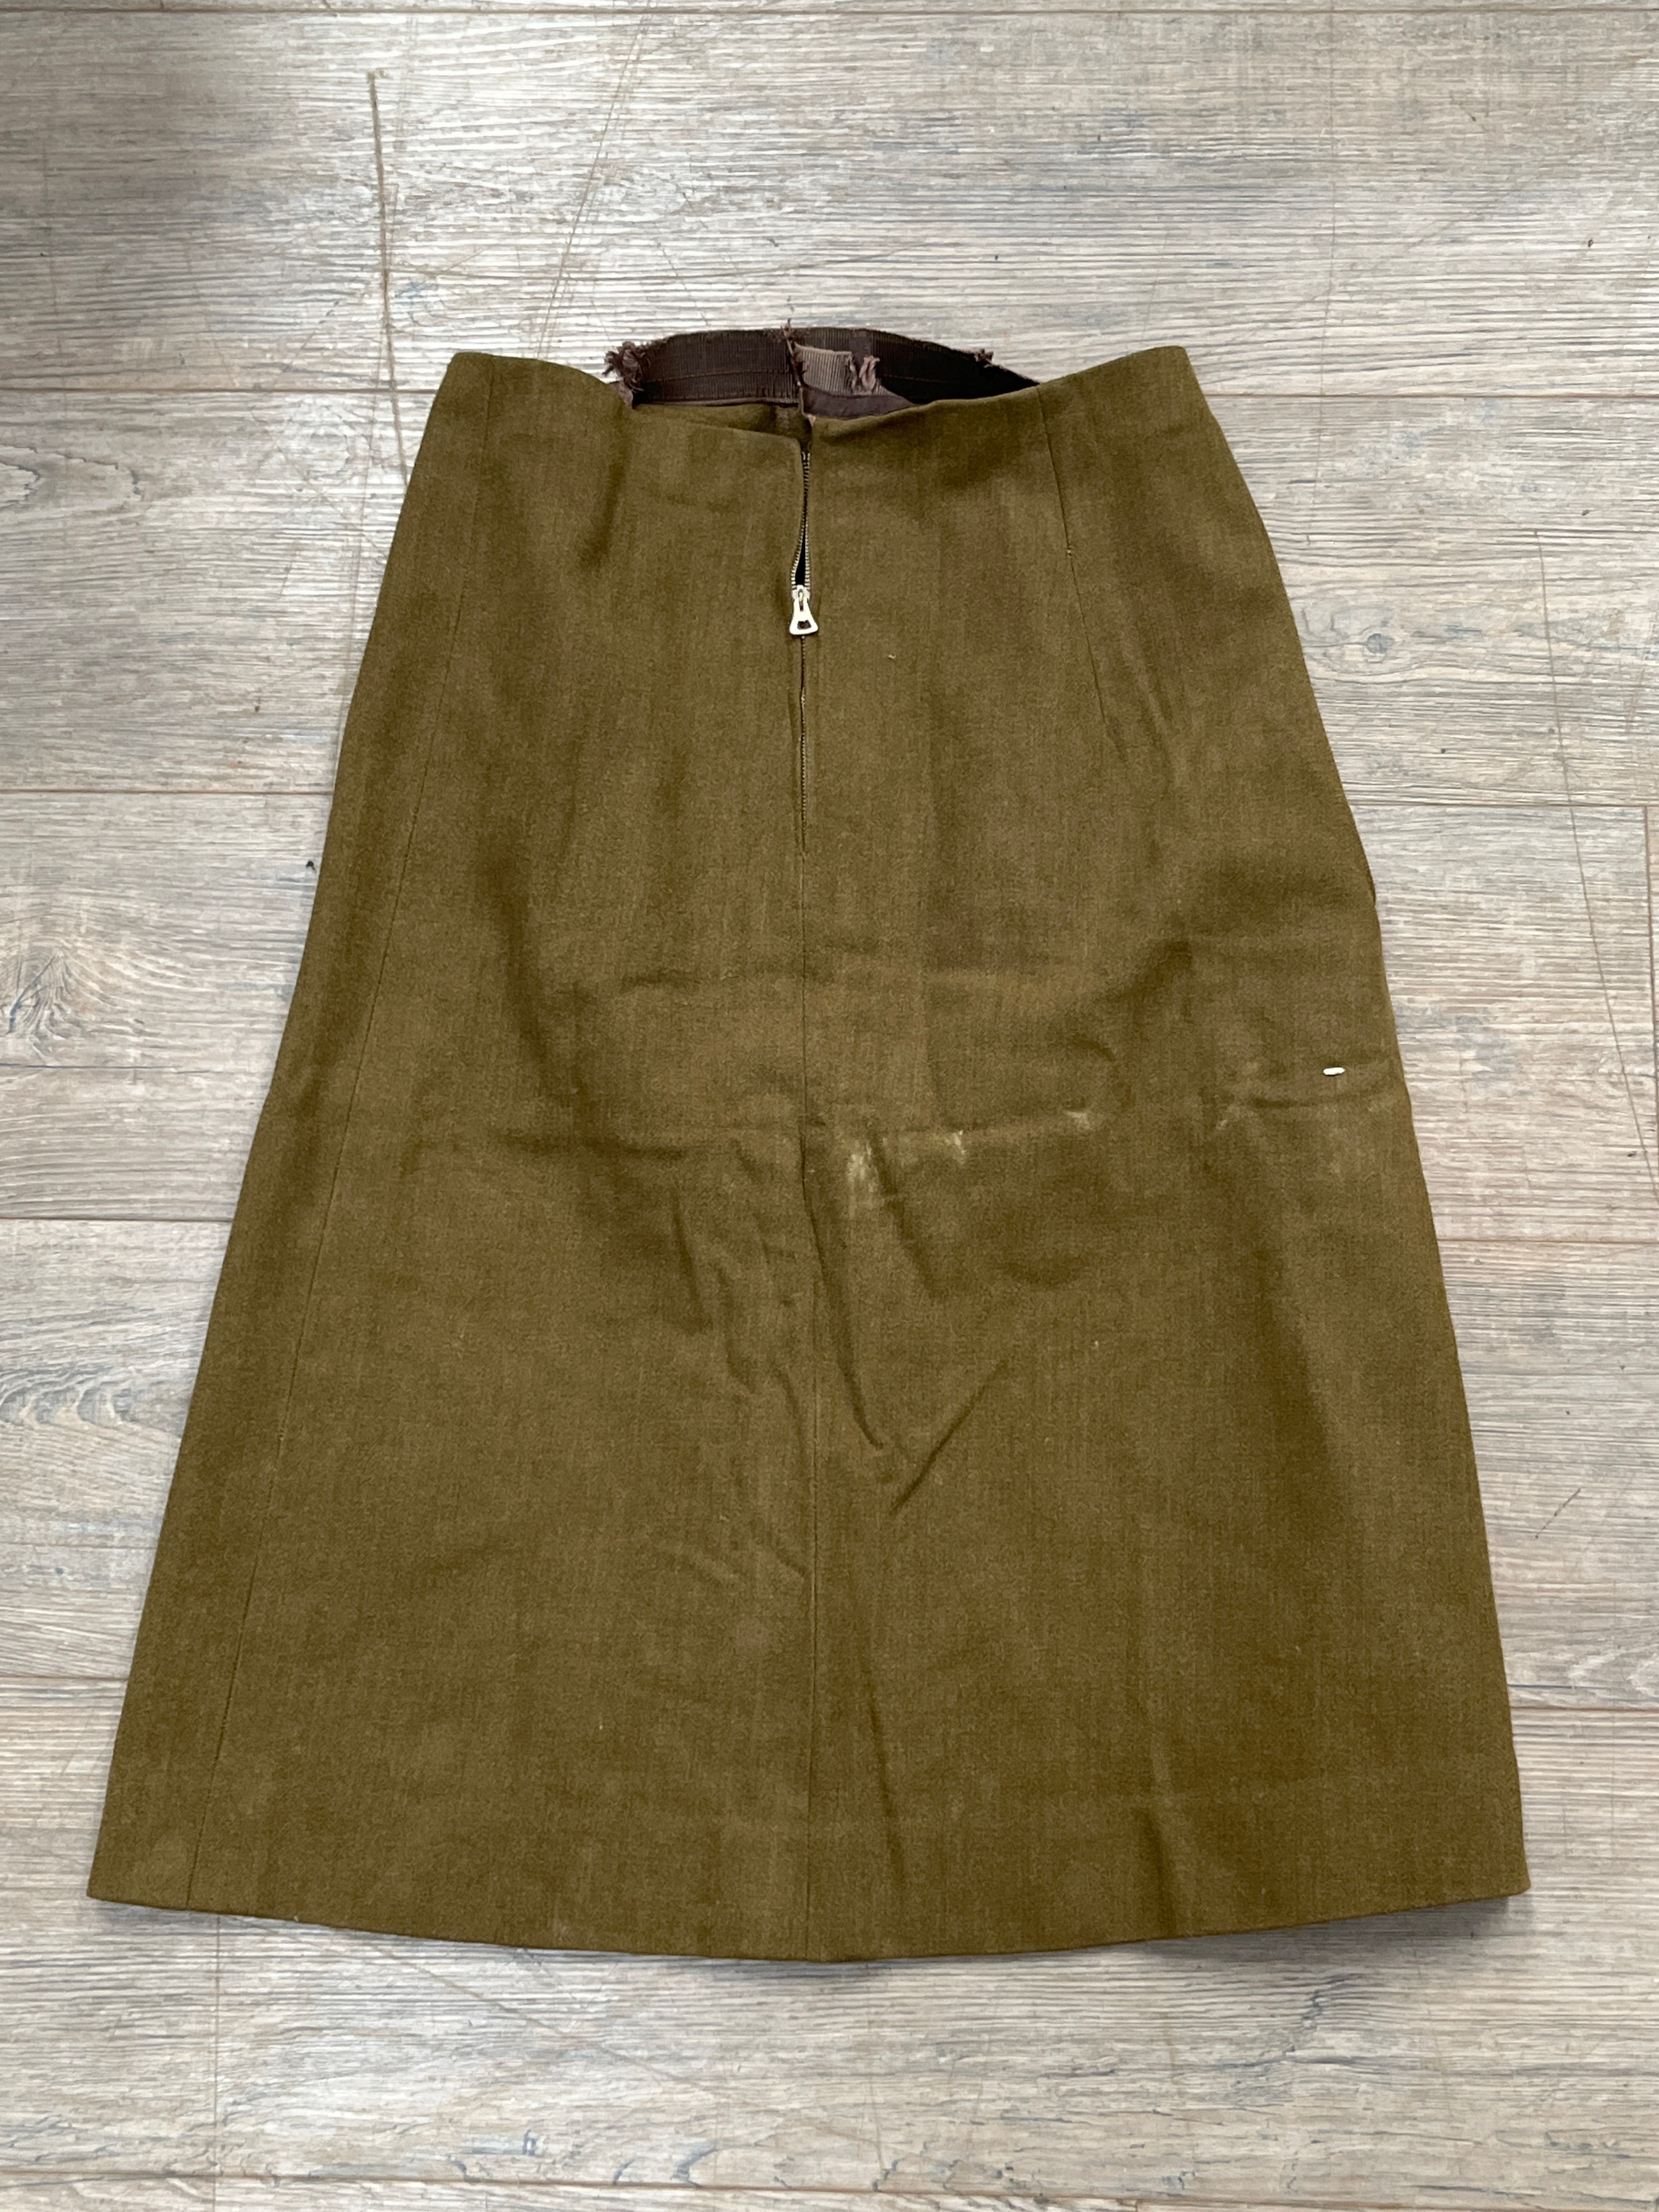 A WWII ATS uniform consisting of blouse and skirt, previously belonging to Florence Smith, who drove - Image 5 of 7